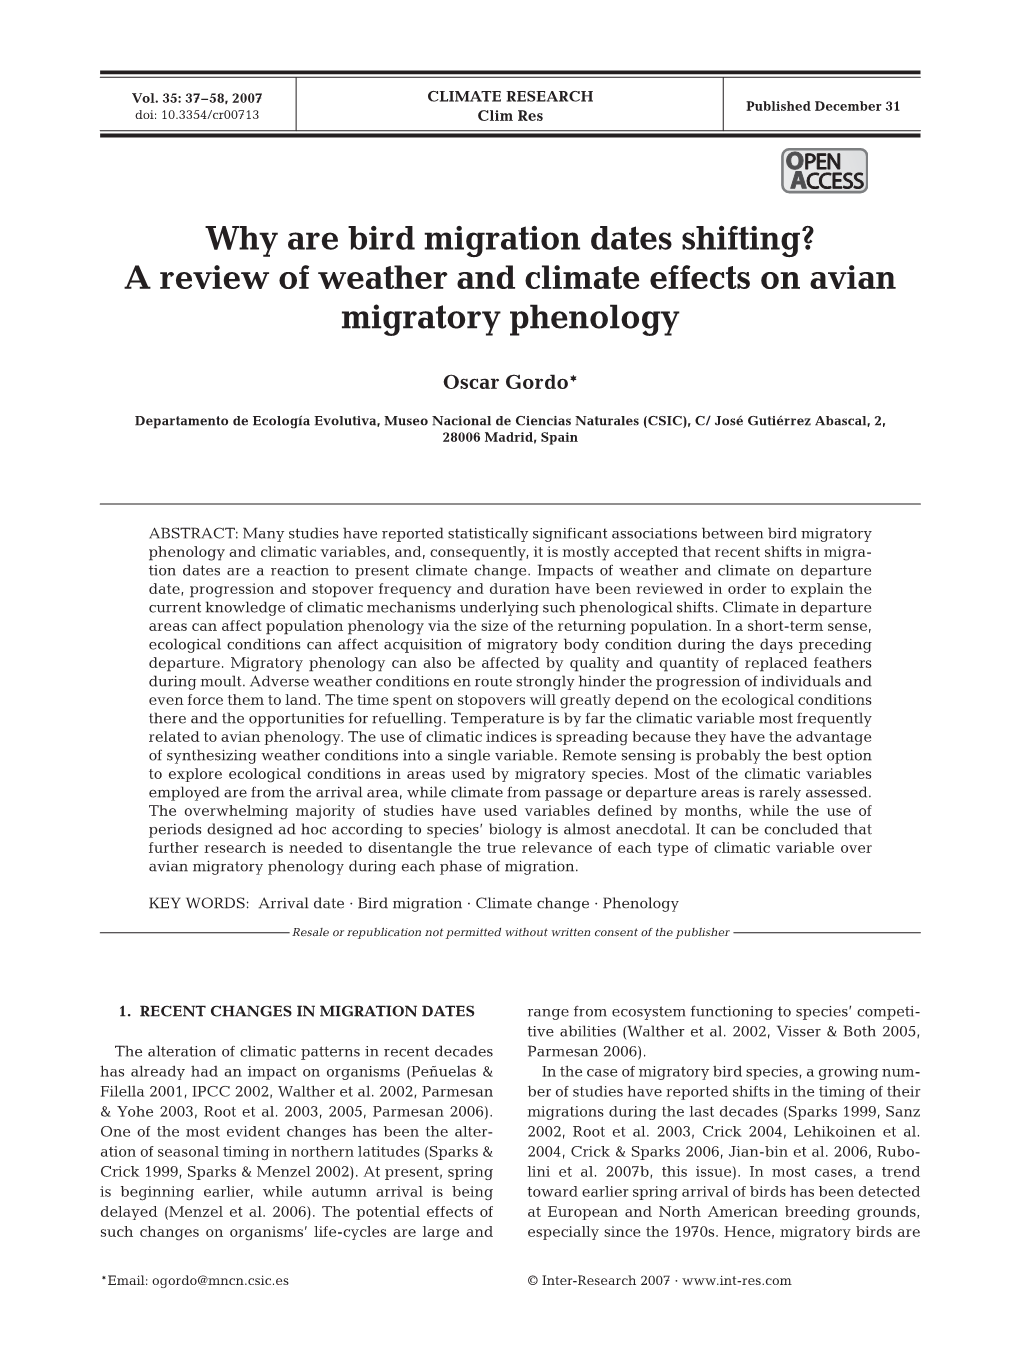 Why Are Bird Migration Dates Shifting? a Review of Weather and Climate Effects on Avian Migratory Phenology